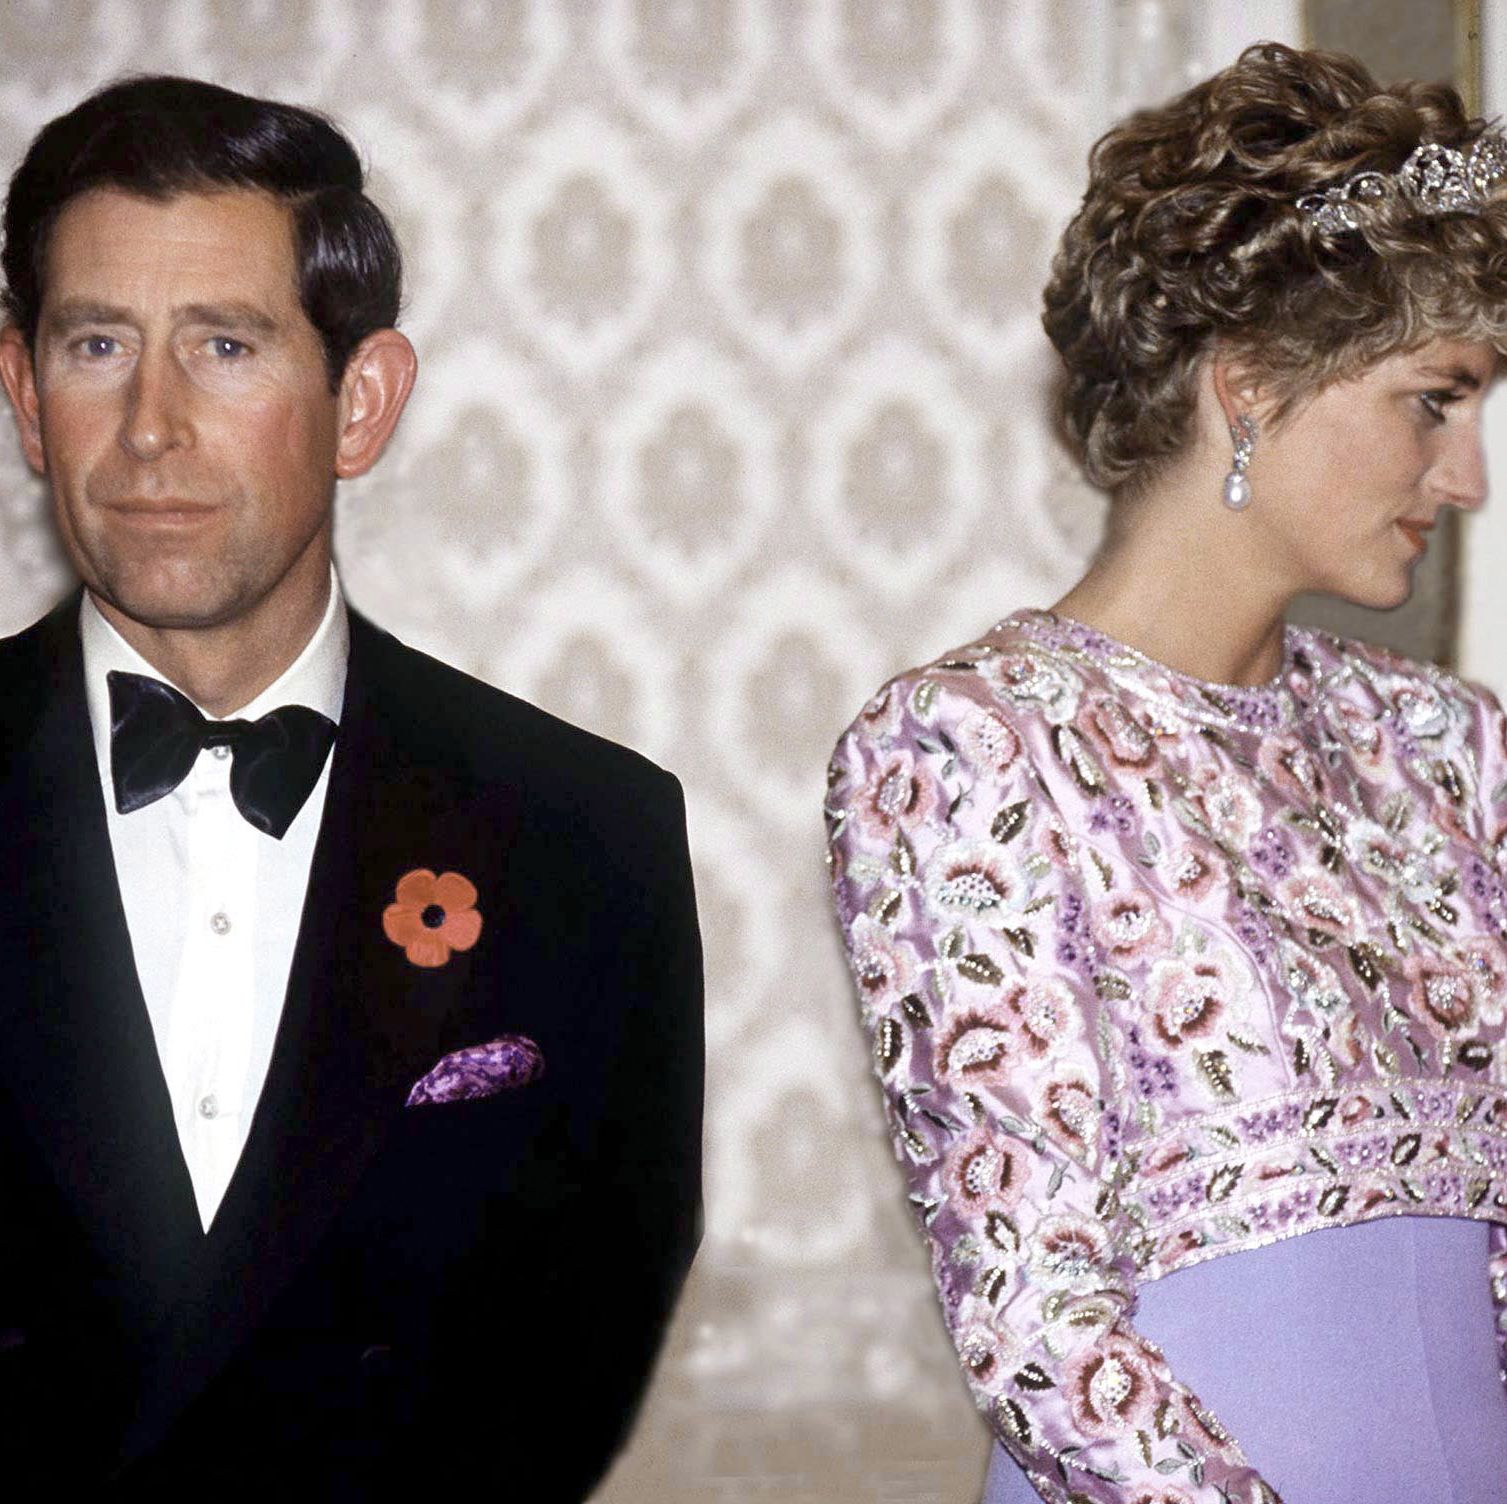 The Real Story of Prince Charles and Princess Diana's Separation